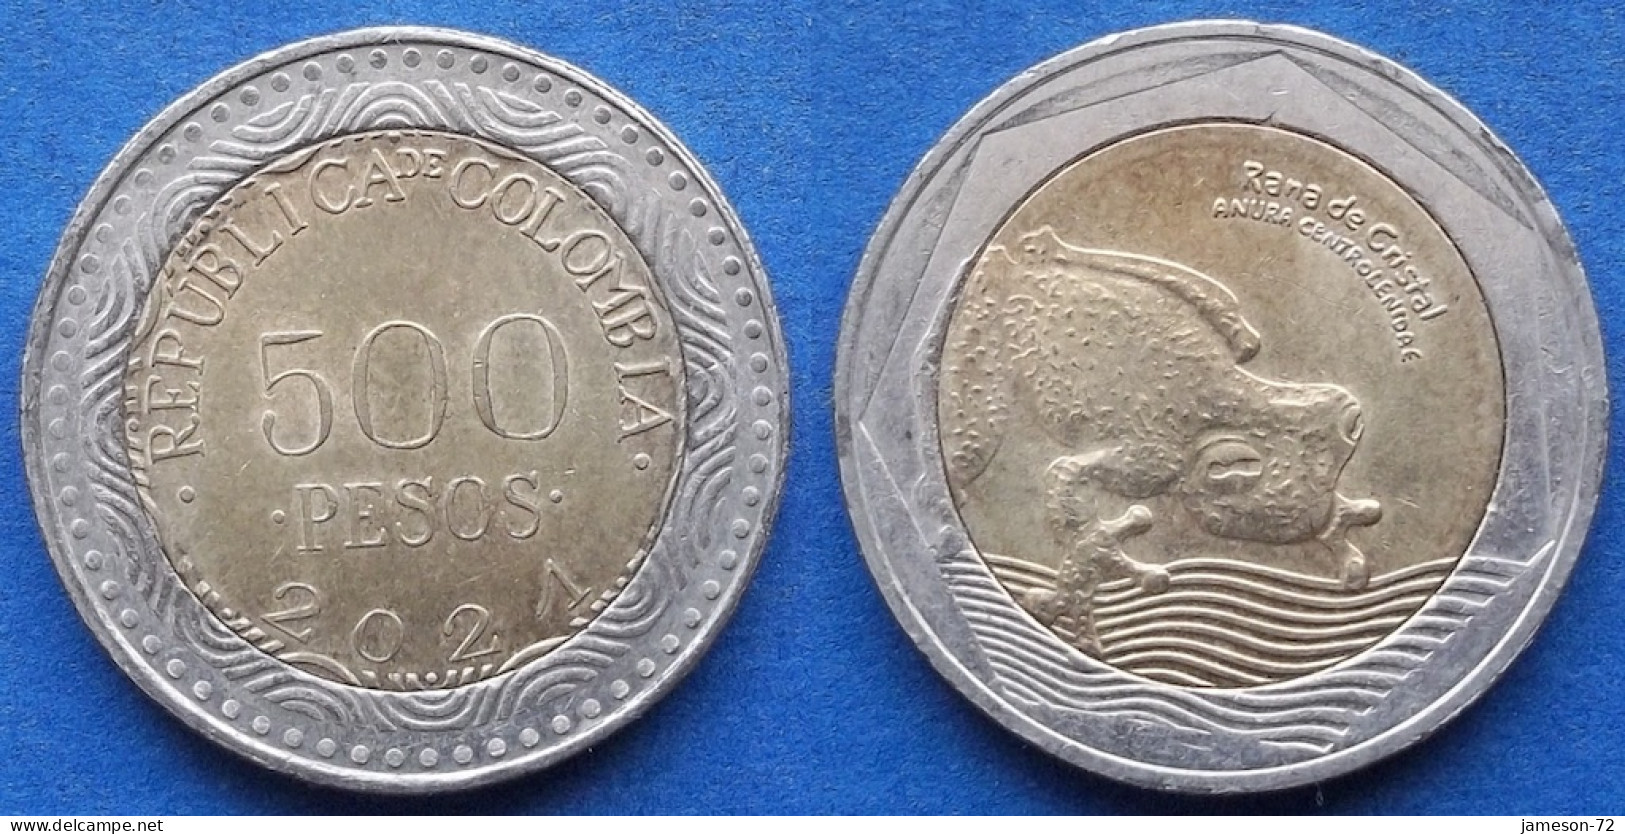 COLOMBIA - 500 Pesos 2021 "Glass Frog" KM# 298 Republic - Edelweiss Coins - Colombia